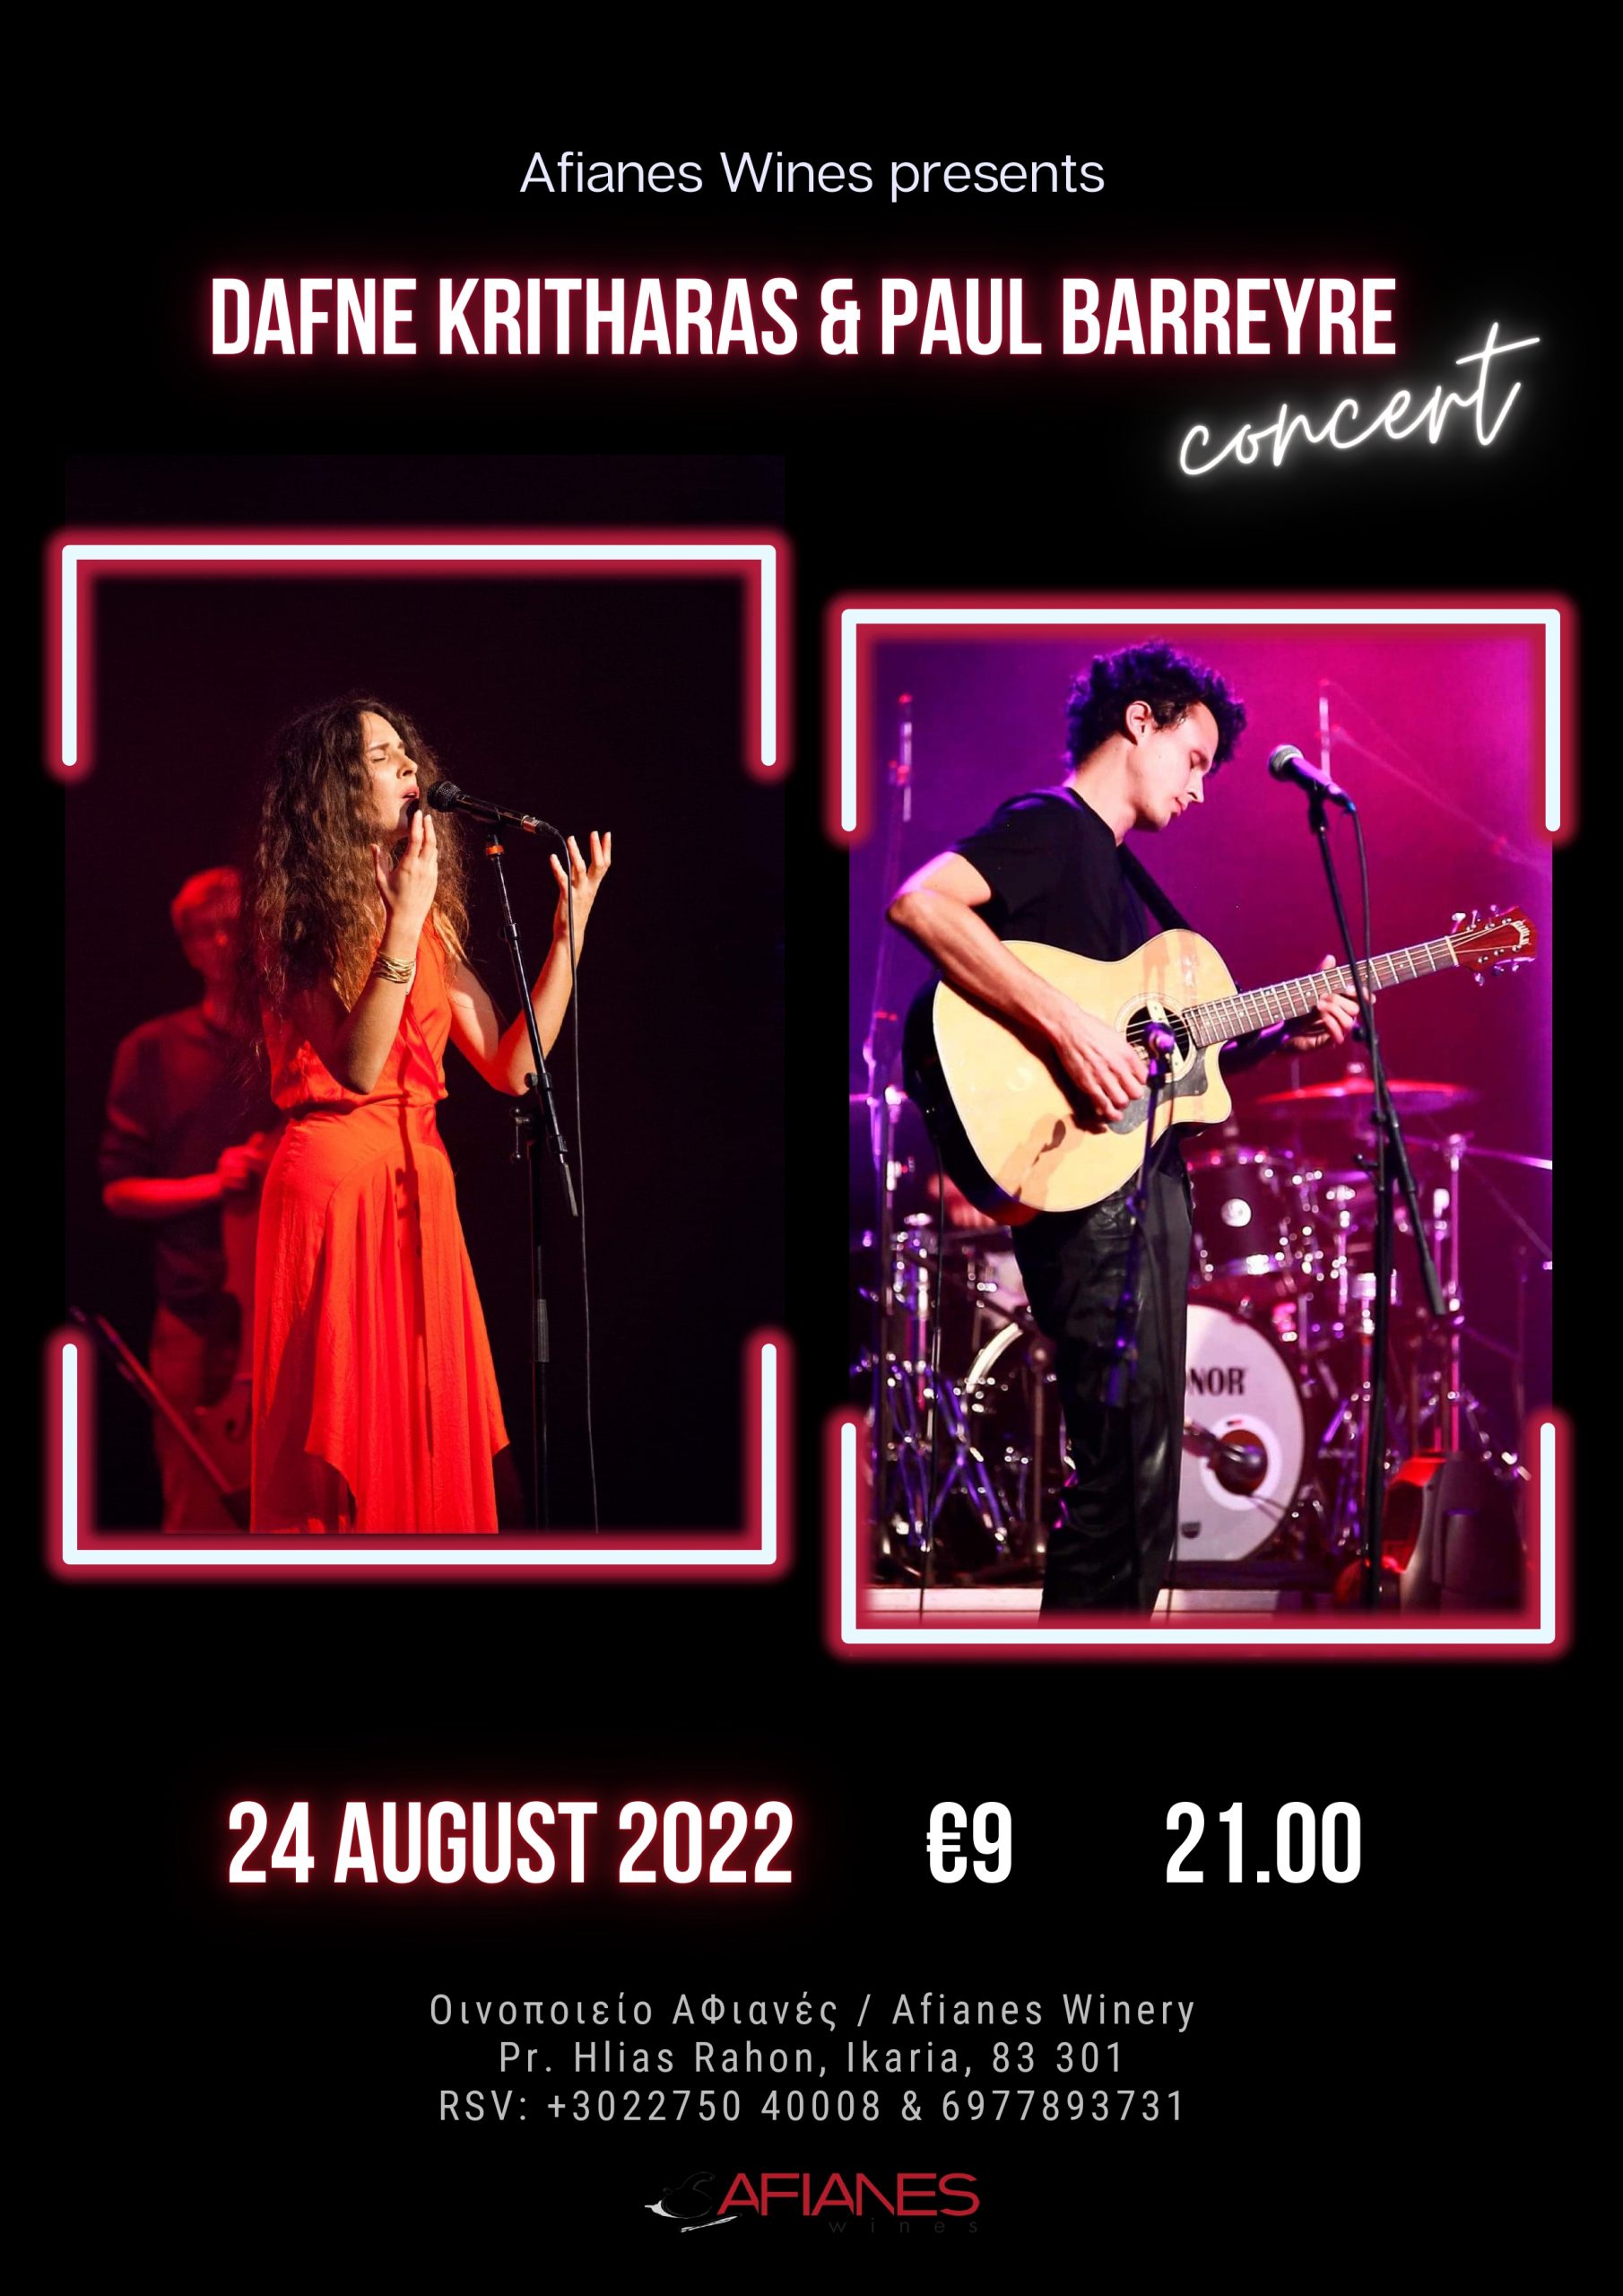 Concert with Dafne Kritharas & Paul Barreyre